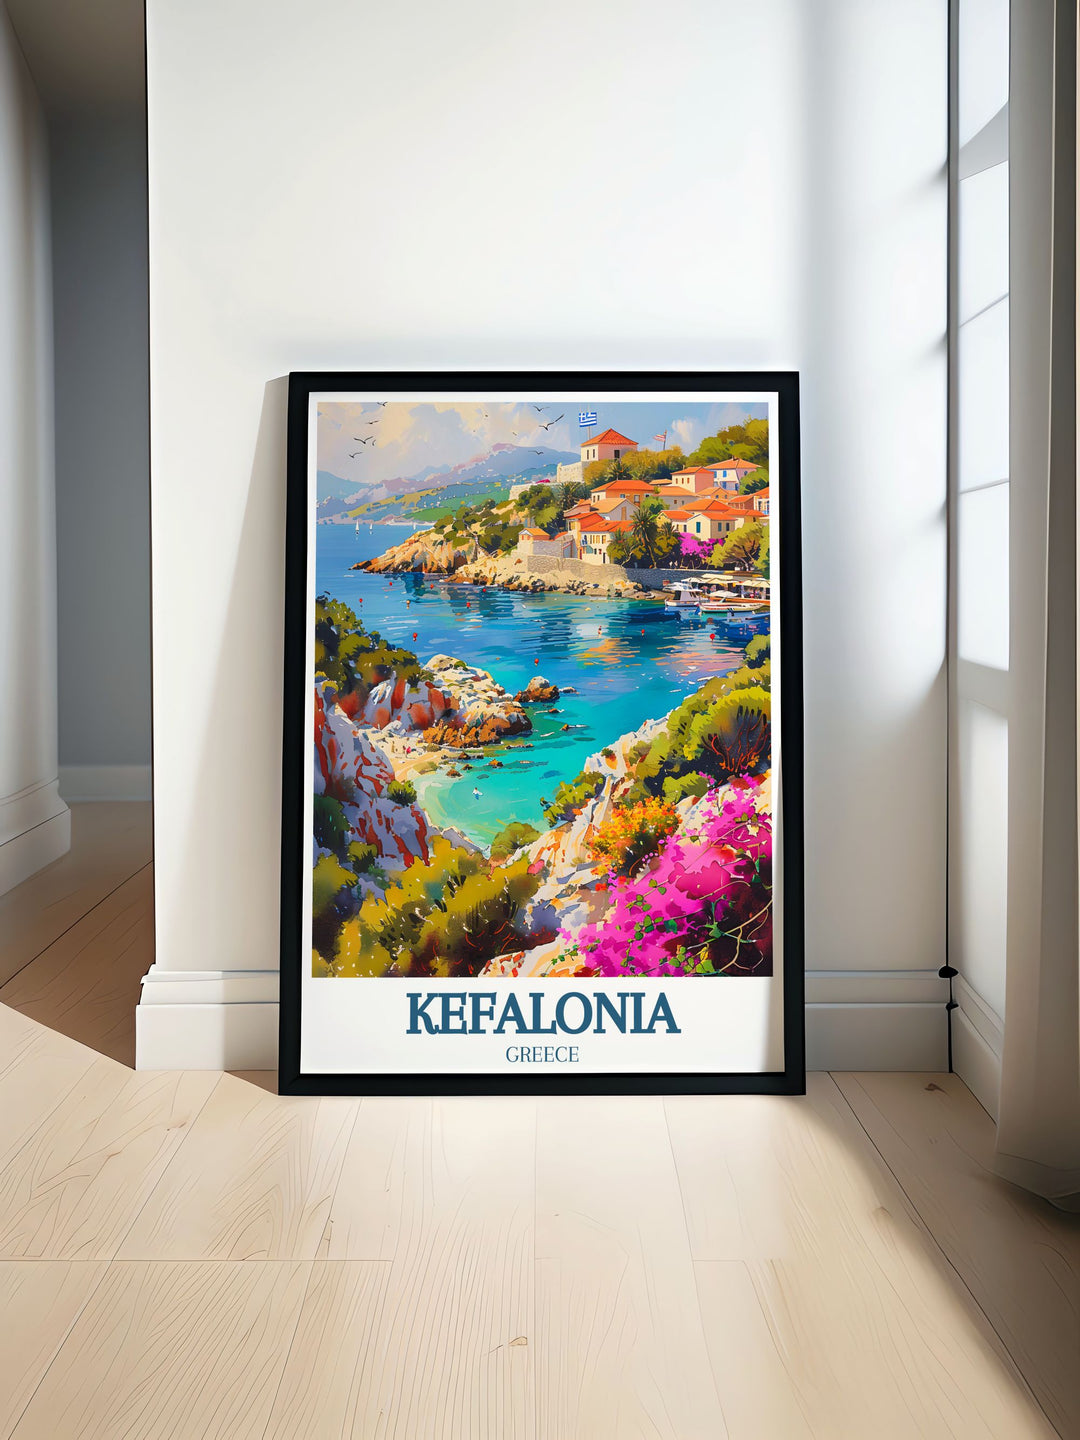 This travel poster showcases the picturesque beauty of Kefalonia, capturing its stunning landscapes and charming villages. The vibrant illustration brings the essence of this Greek island paradise to life.